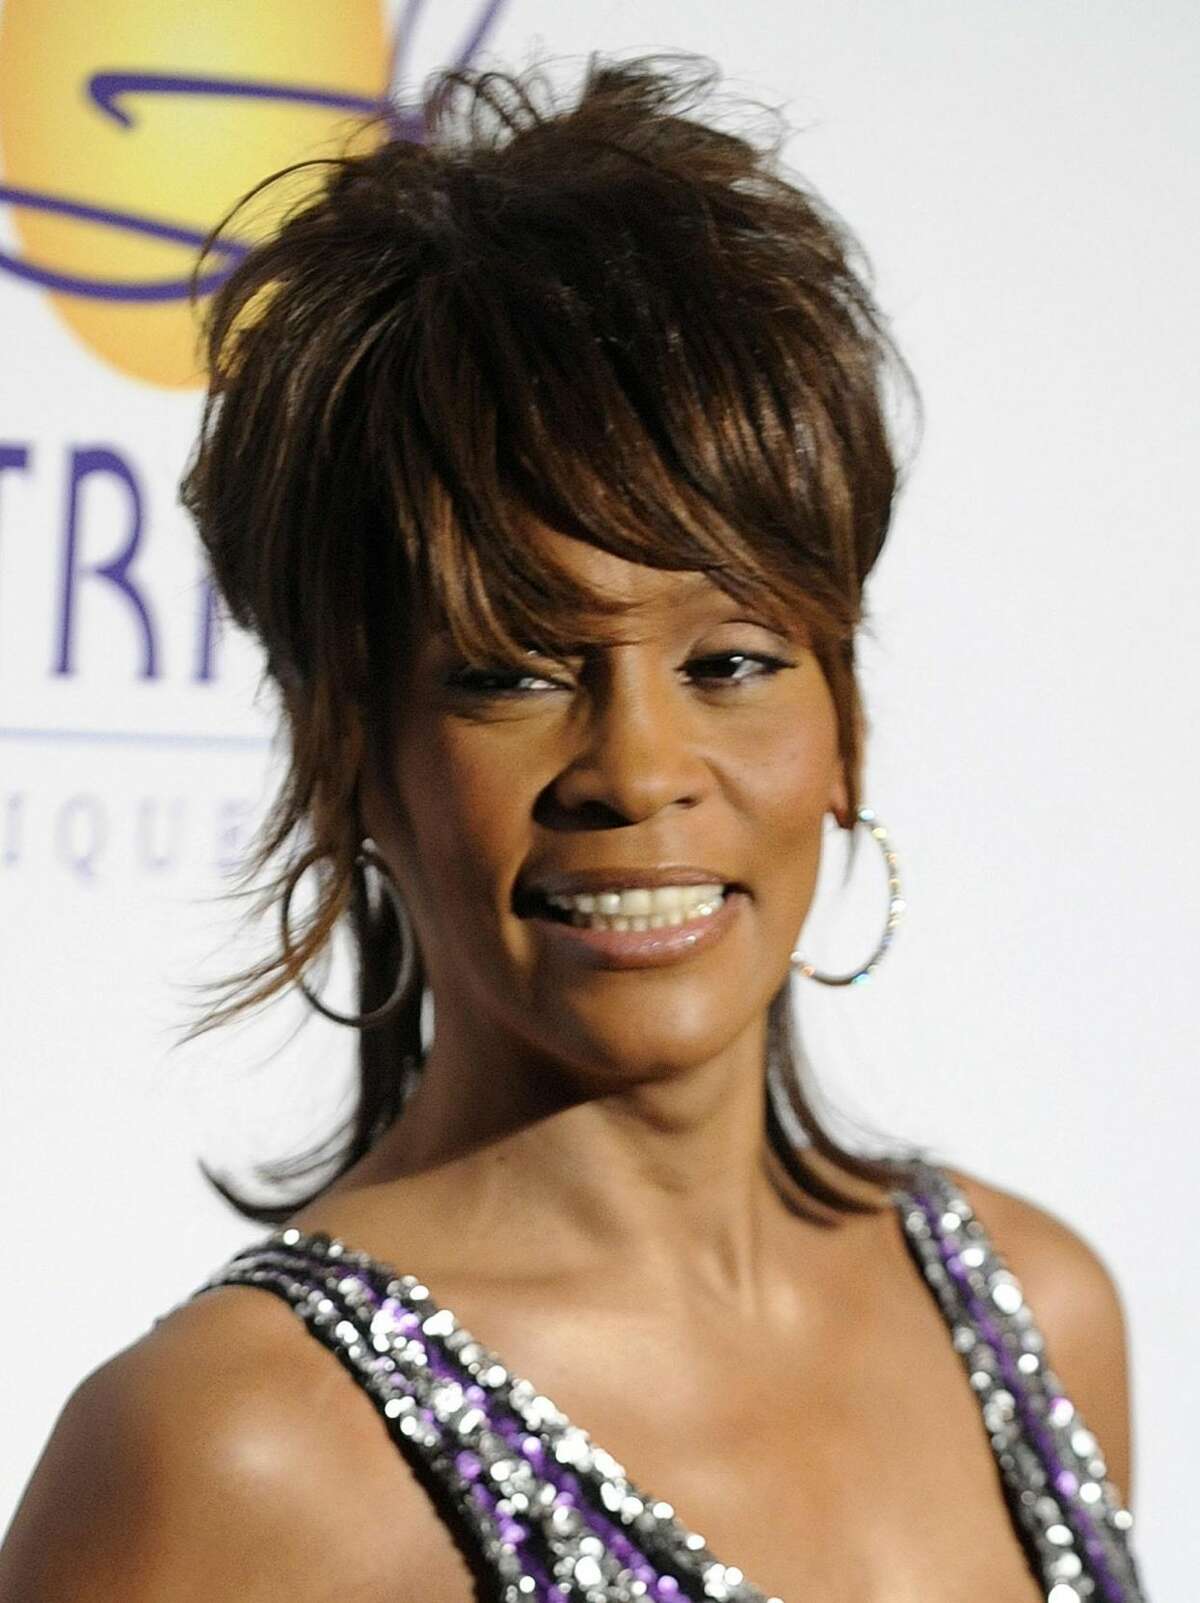 In this Feb. 9 file photo, singer Whitney Houston arrives at the Clive Davis pre-Grammy party in Beverly Hills, Calif.